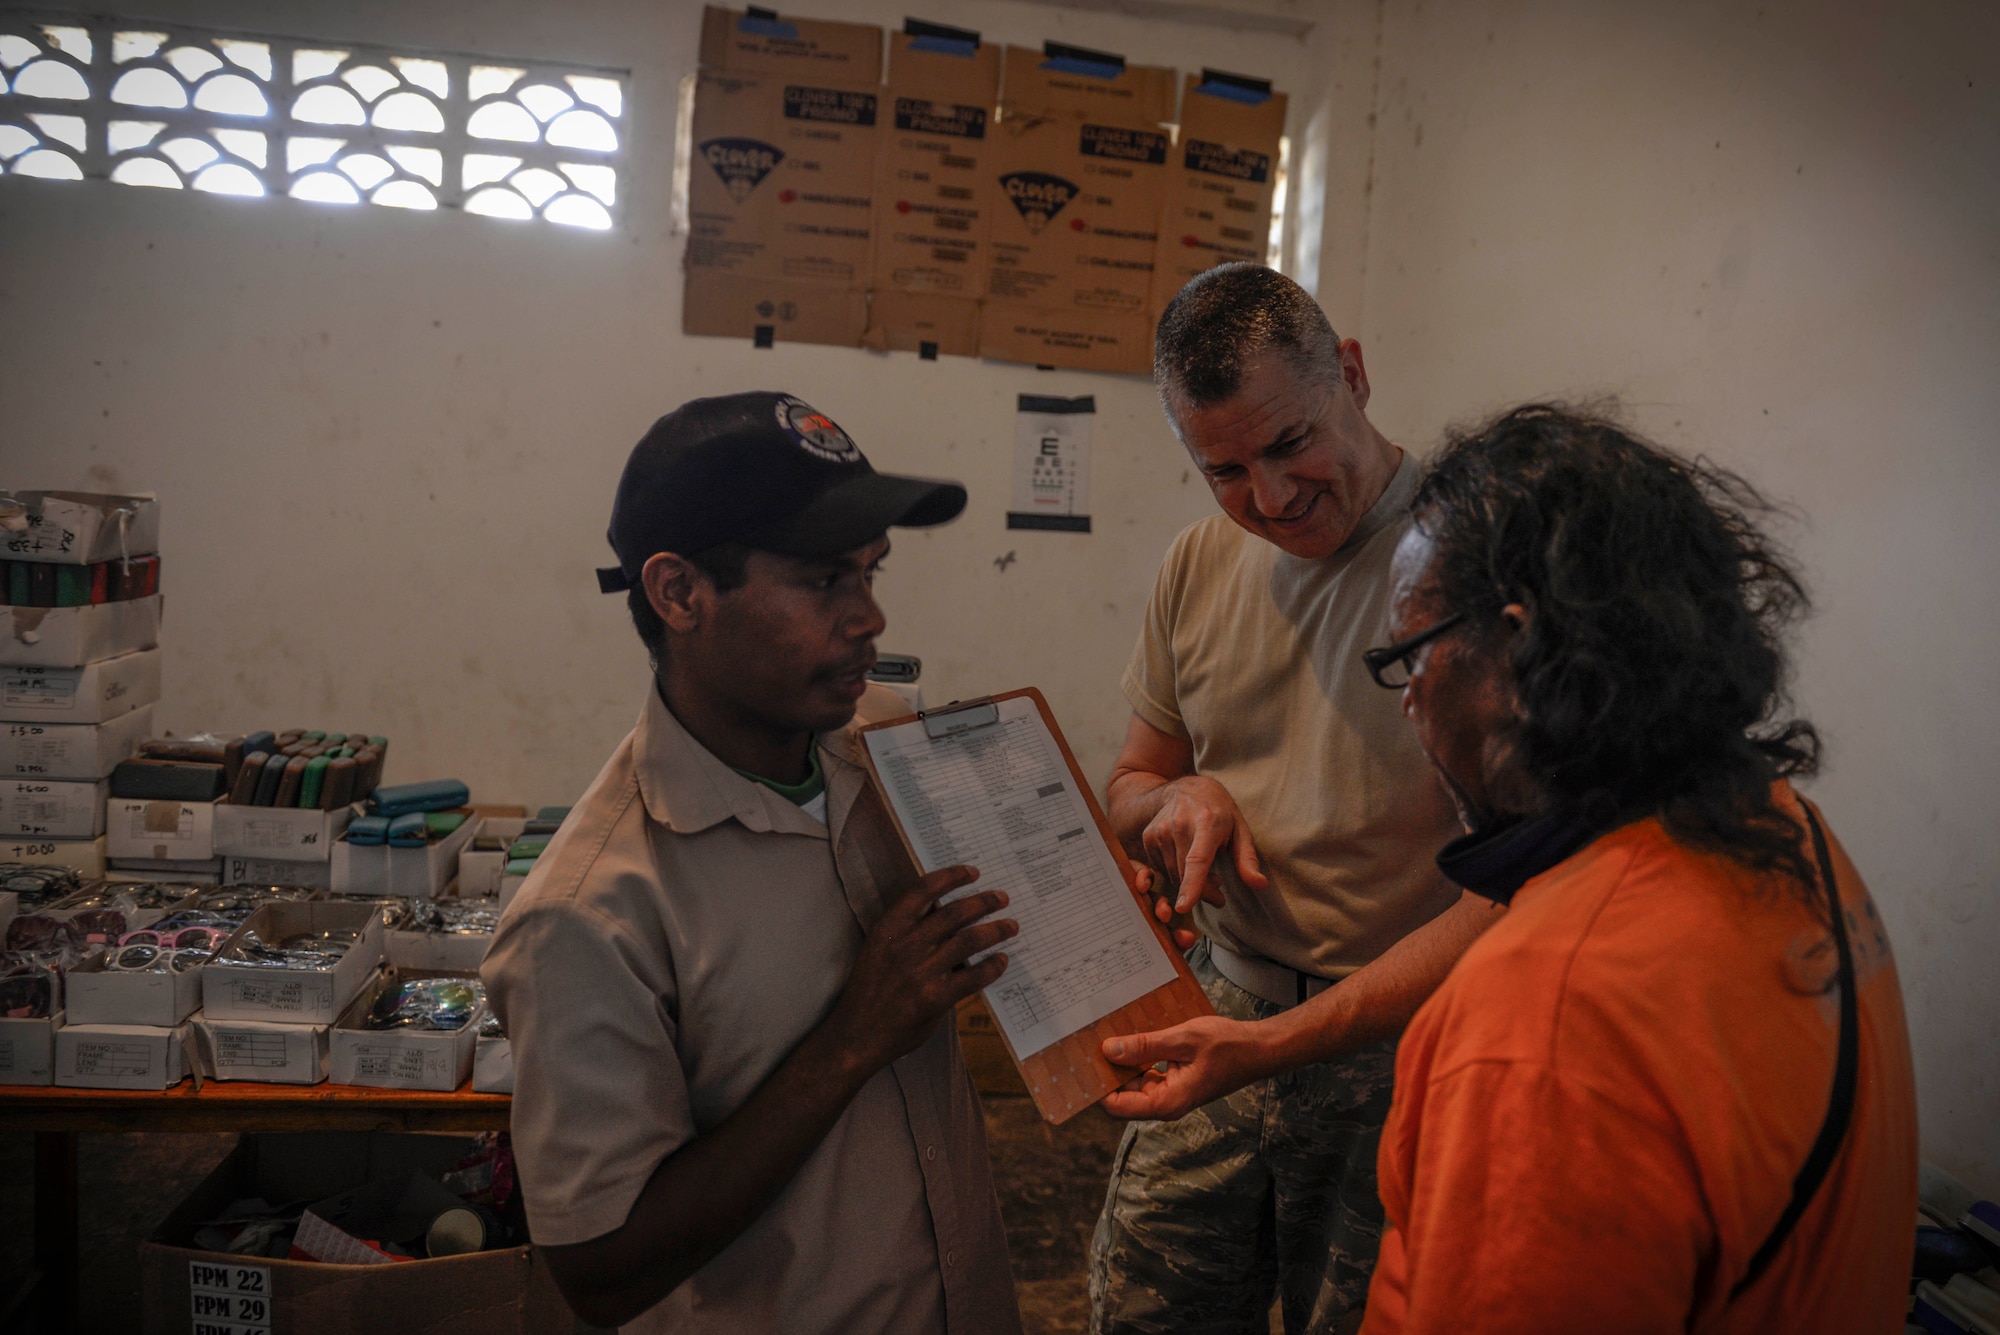 U.S. Air Force Master Sgt. Robert Shaw (center), 141st Medical Group NCO in charge of optometry, shows a patient his vision results during an Operation Pacific Angel health services outreach event Sept. 7, 2015, in Baucau, Timor-Leste. Pacific Angel is a multilateral humanitarian assistance civil military operation, which improves military-to-military partnerships in the Pacific while also providing medical health outreach, civic engineering projects and subject matter exchanges among partner forces. (U.S. Air Force photo by Staff Sgt. Alexander W. Riedel/Released)